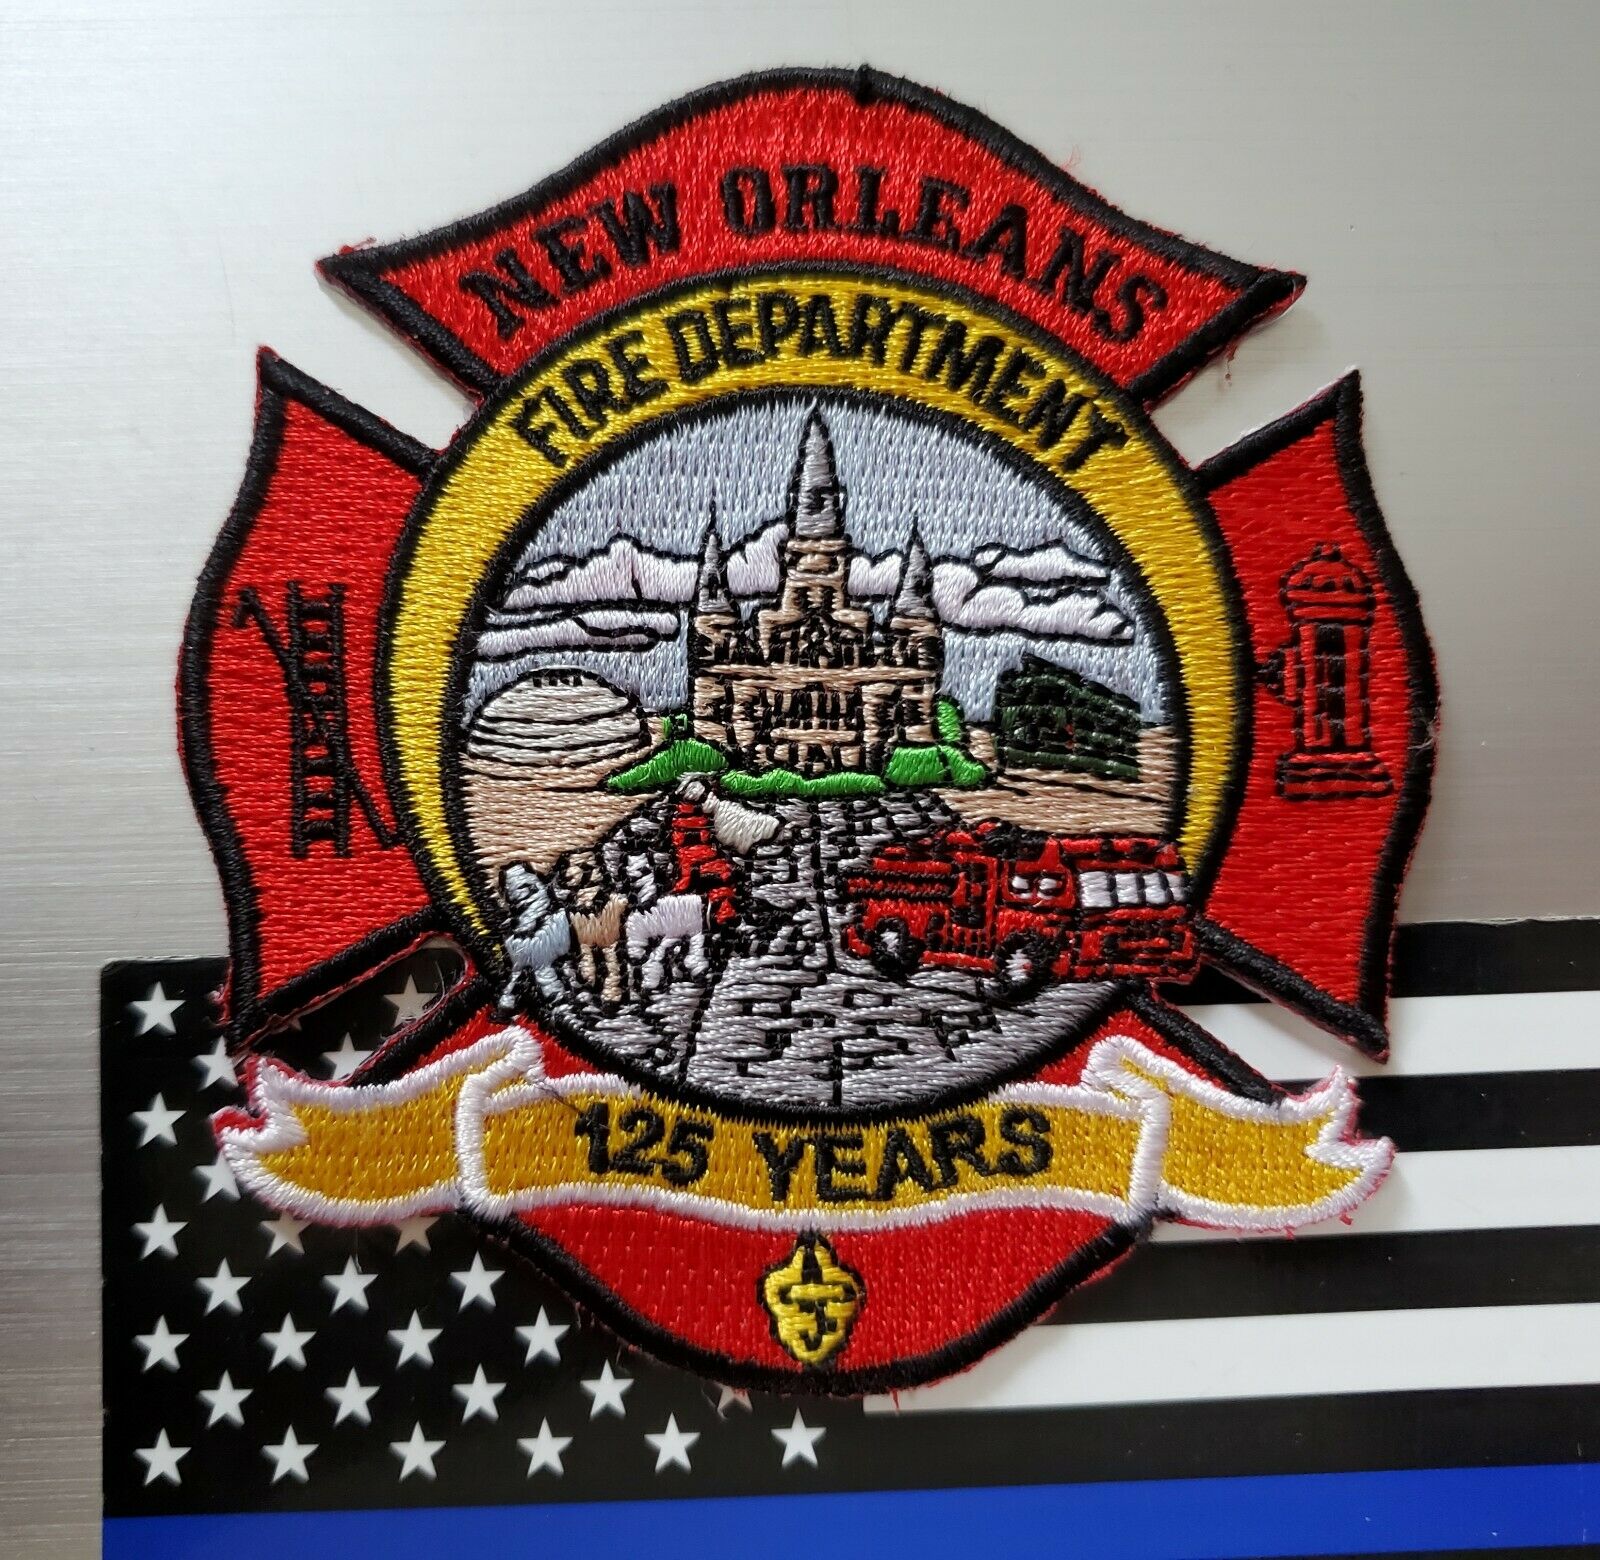 New Orleans Fire Department 125 Years Anniversary Patch! Very Sharp!